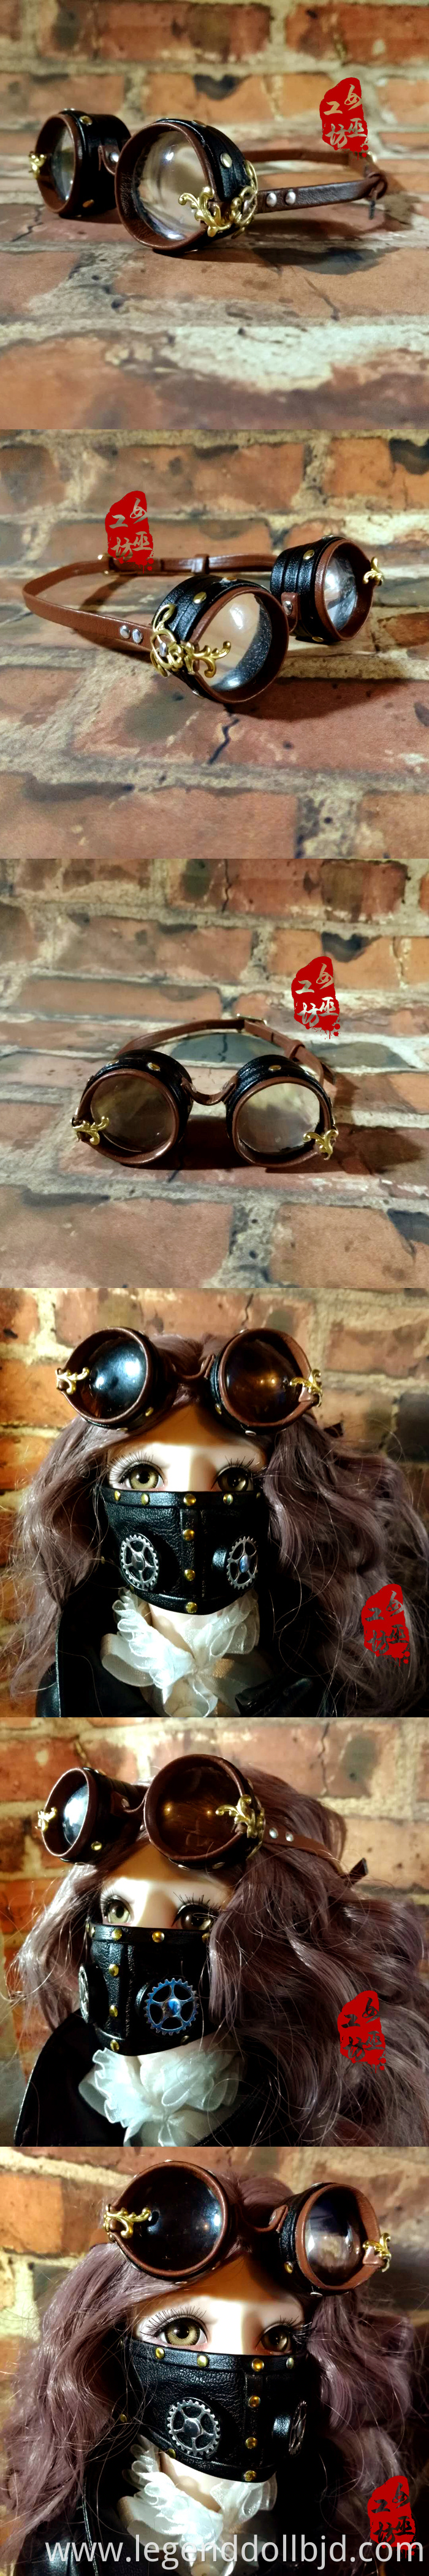 BJD Decorations Goggles Glasses Eyes Protector